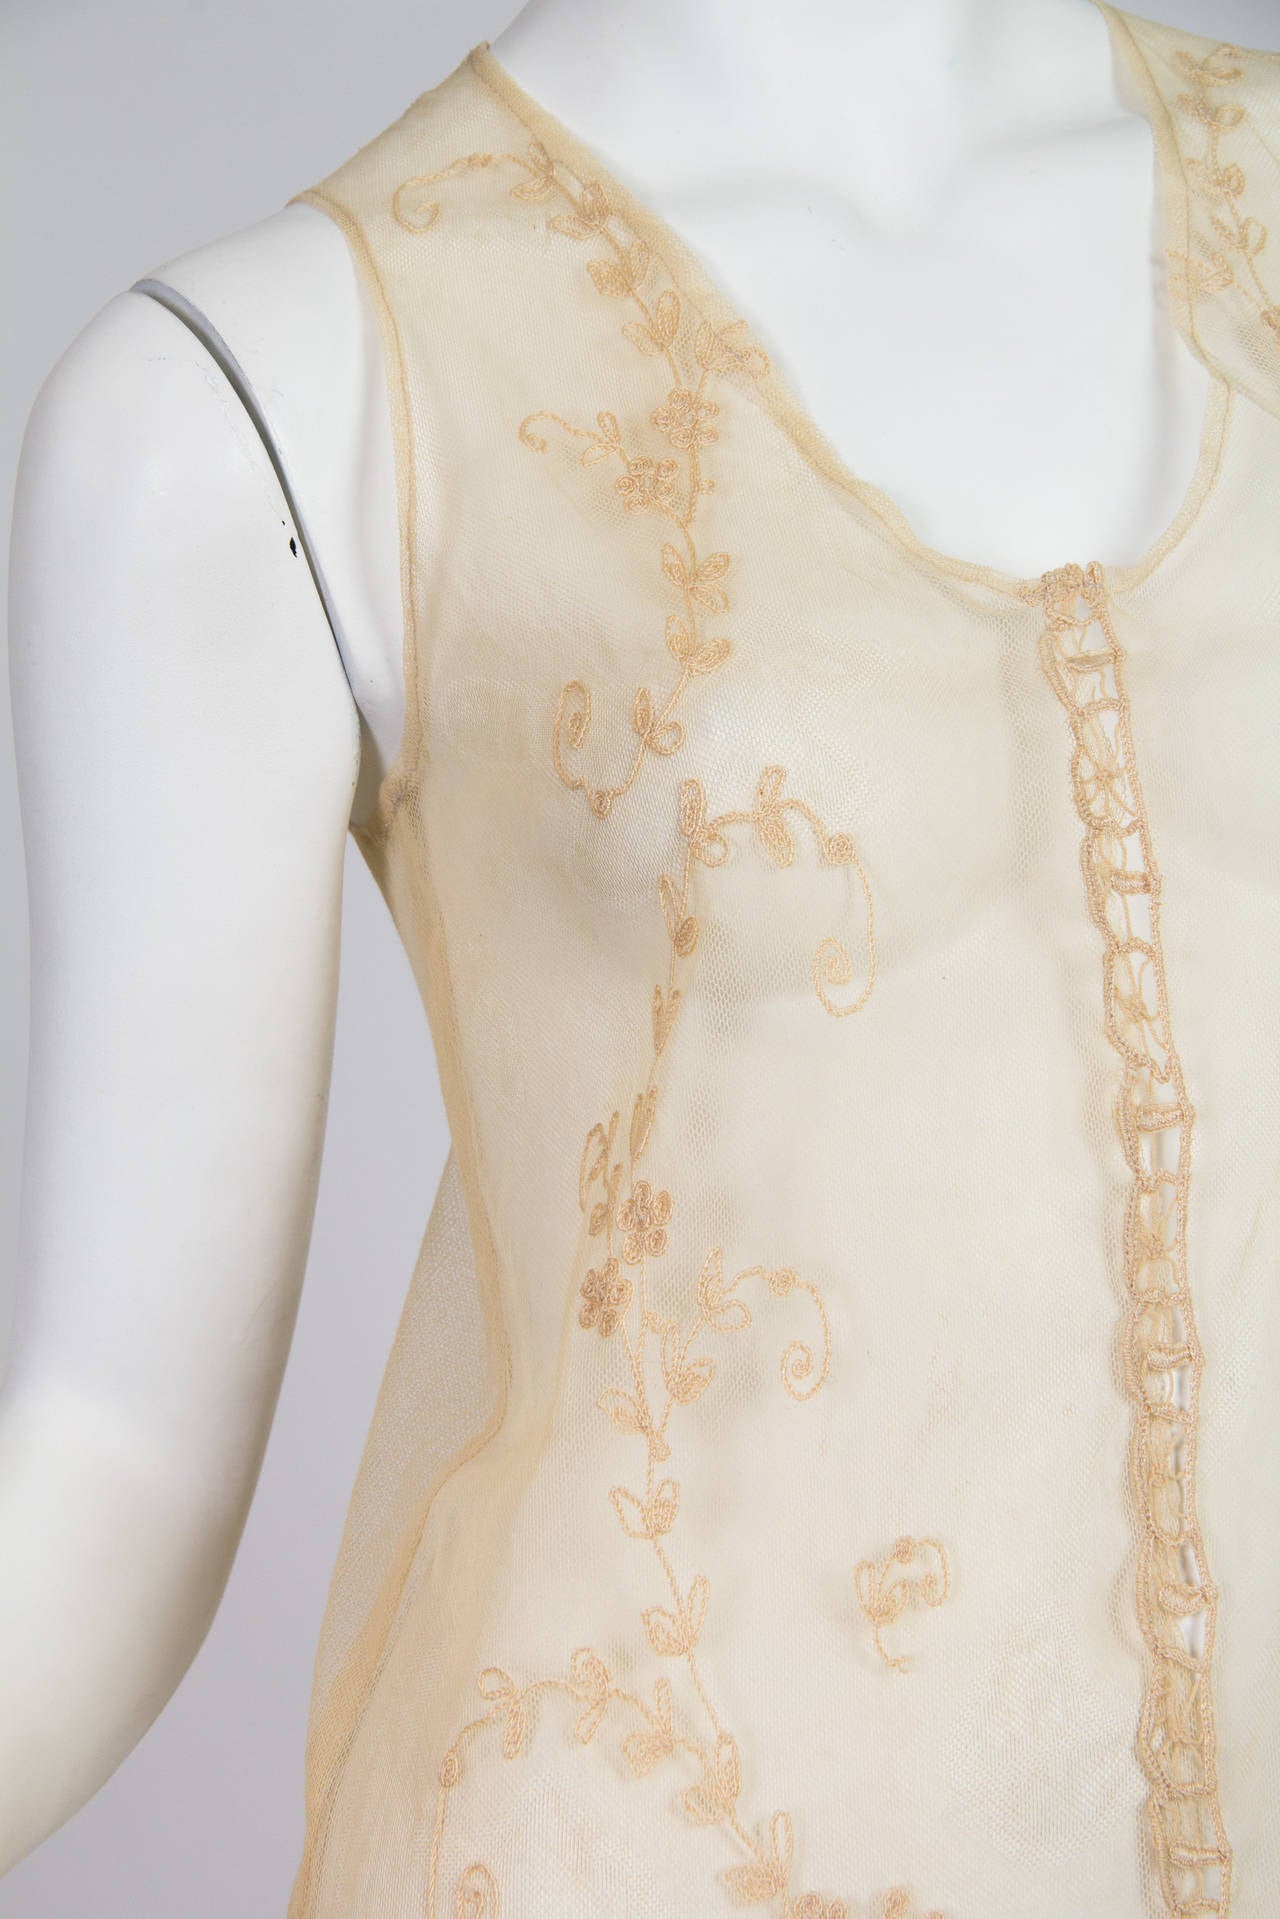 1920s Victorian Curtain Lace Dress For Sale at 1stdibs